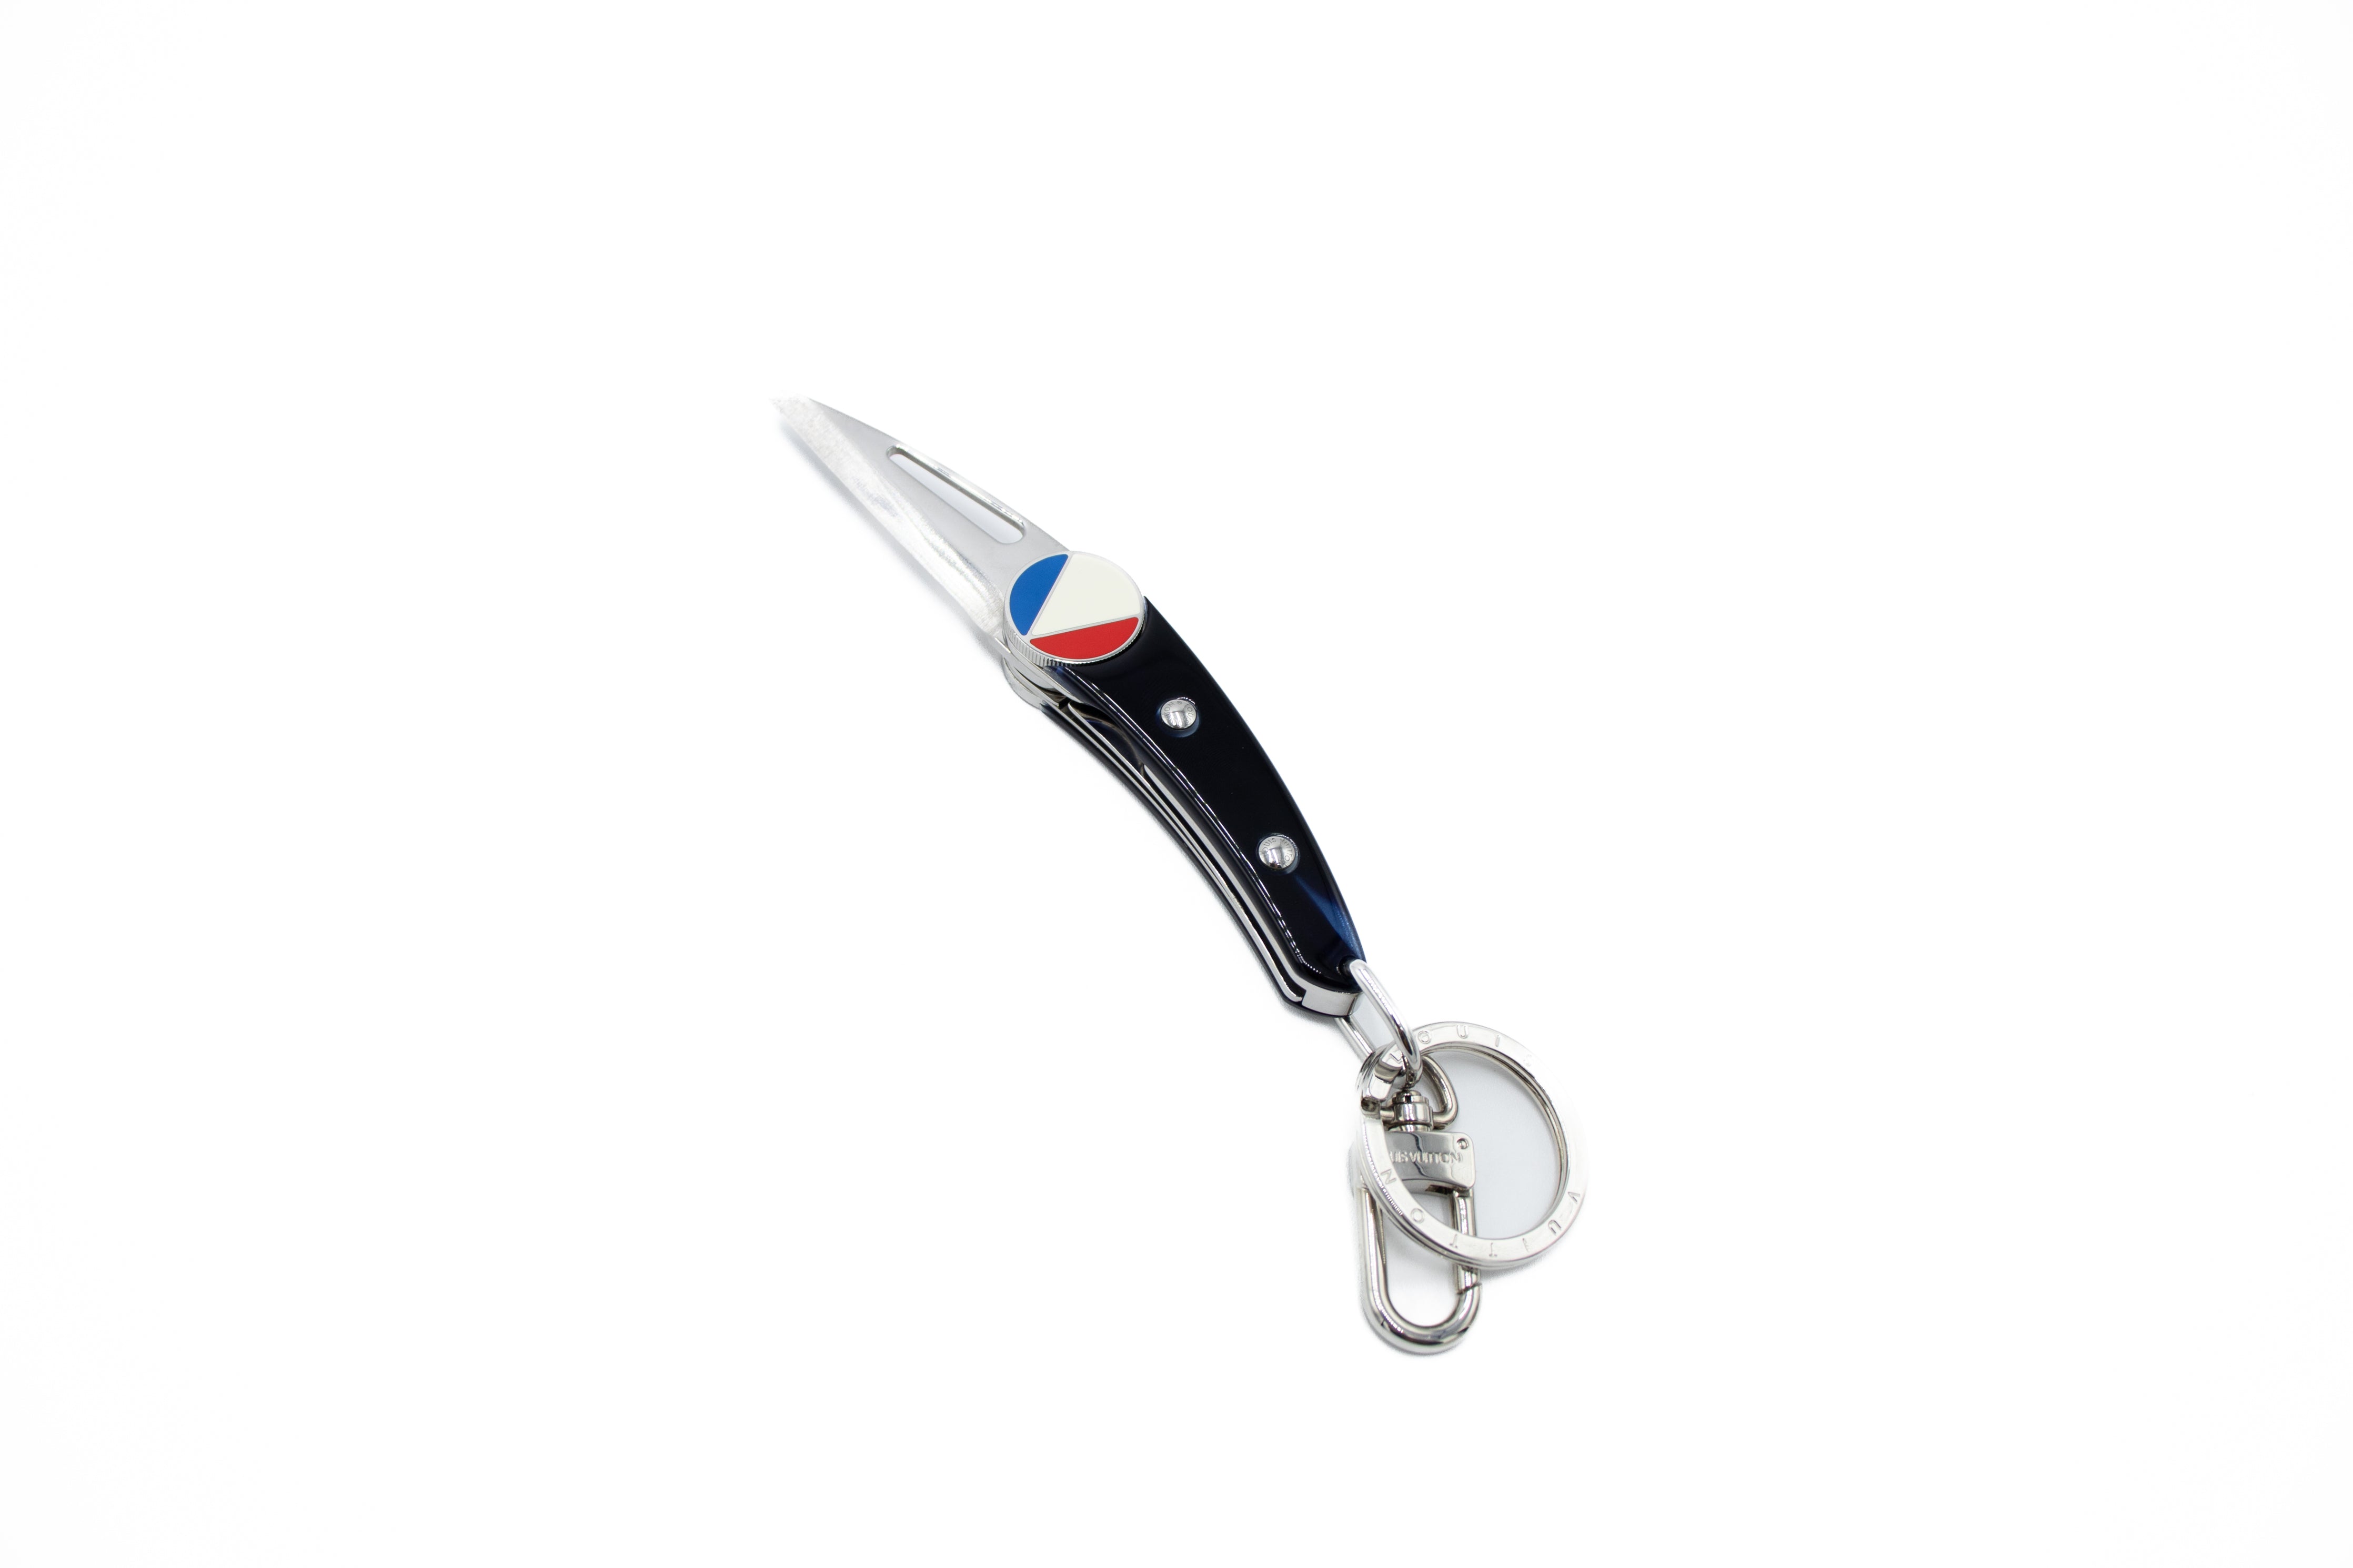 LOUIS VUITTON AMERICA'S CUP POCKET KNIFE